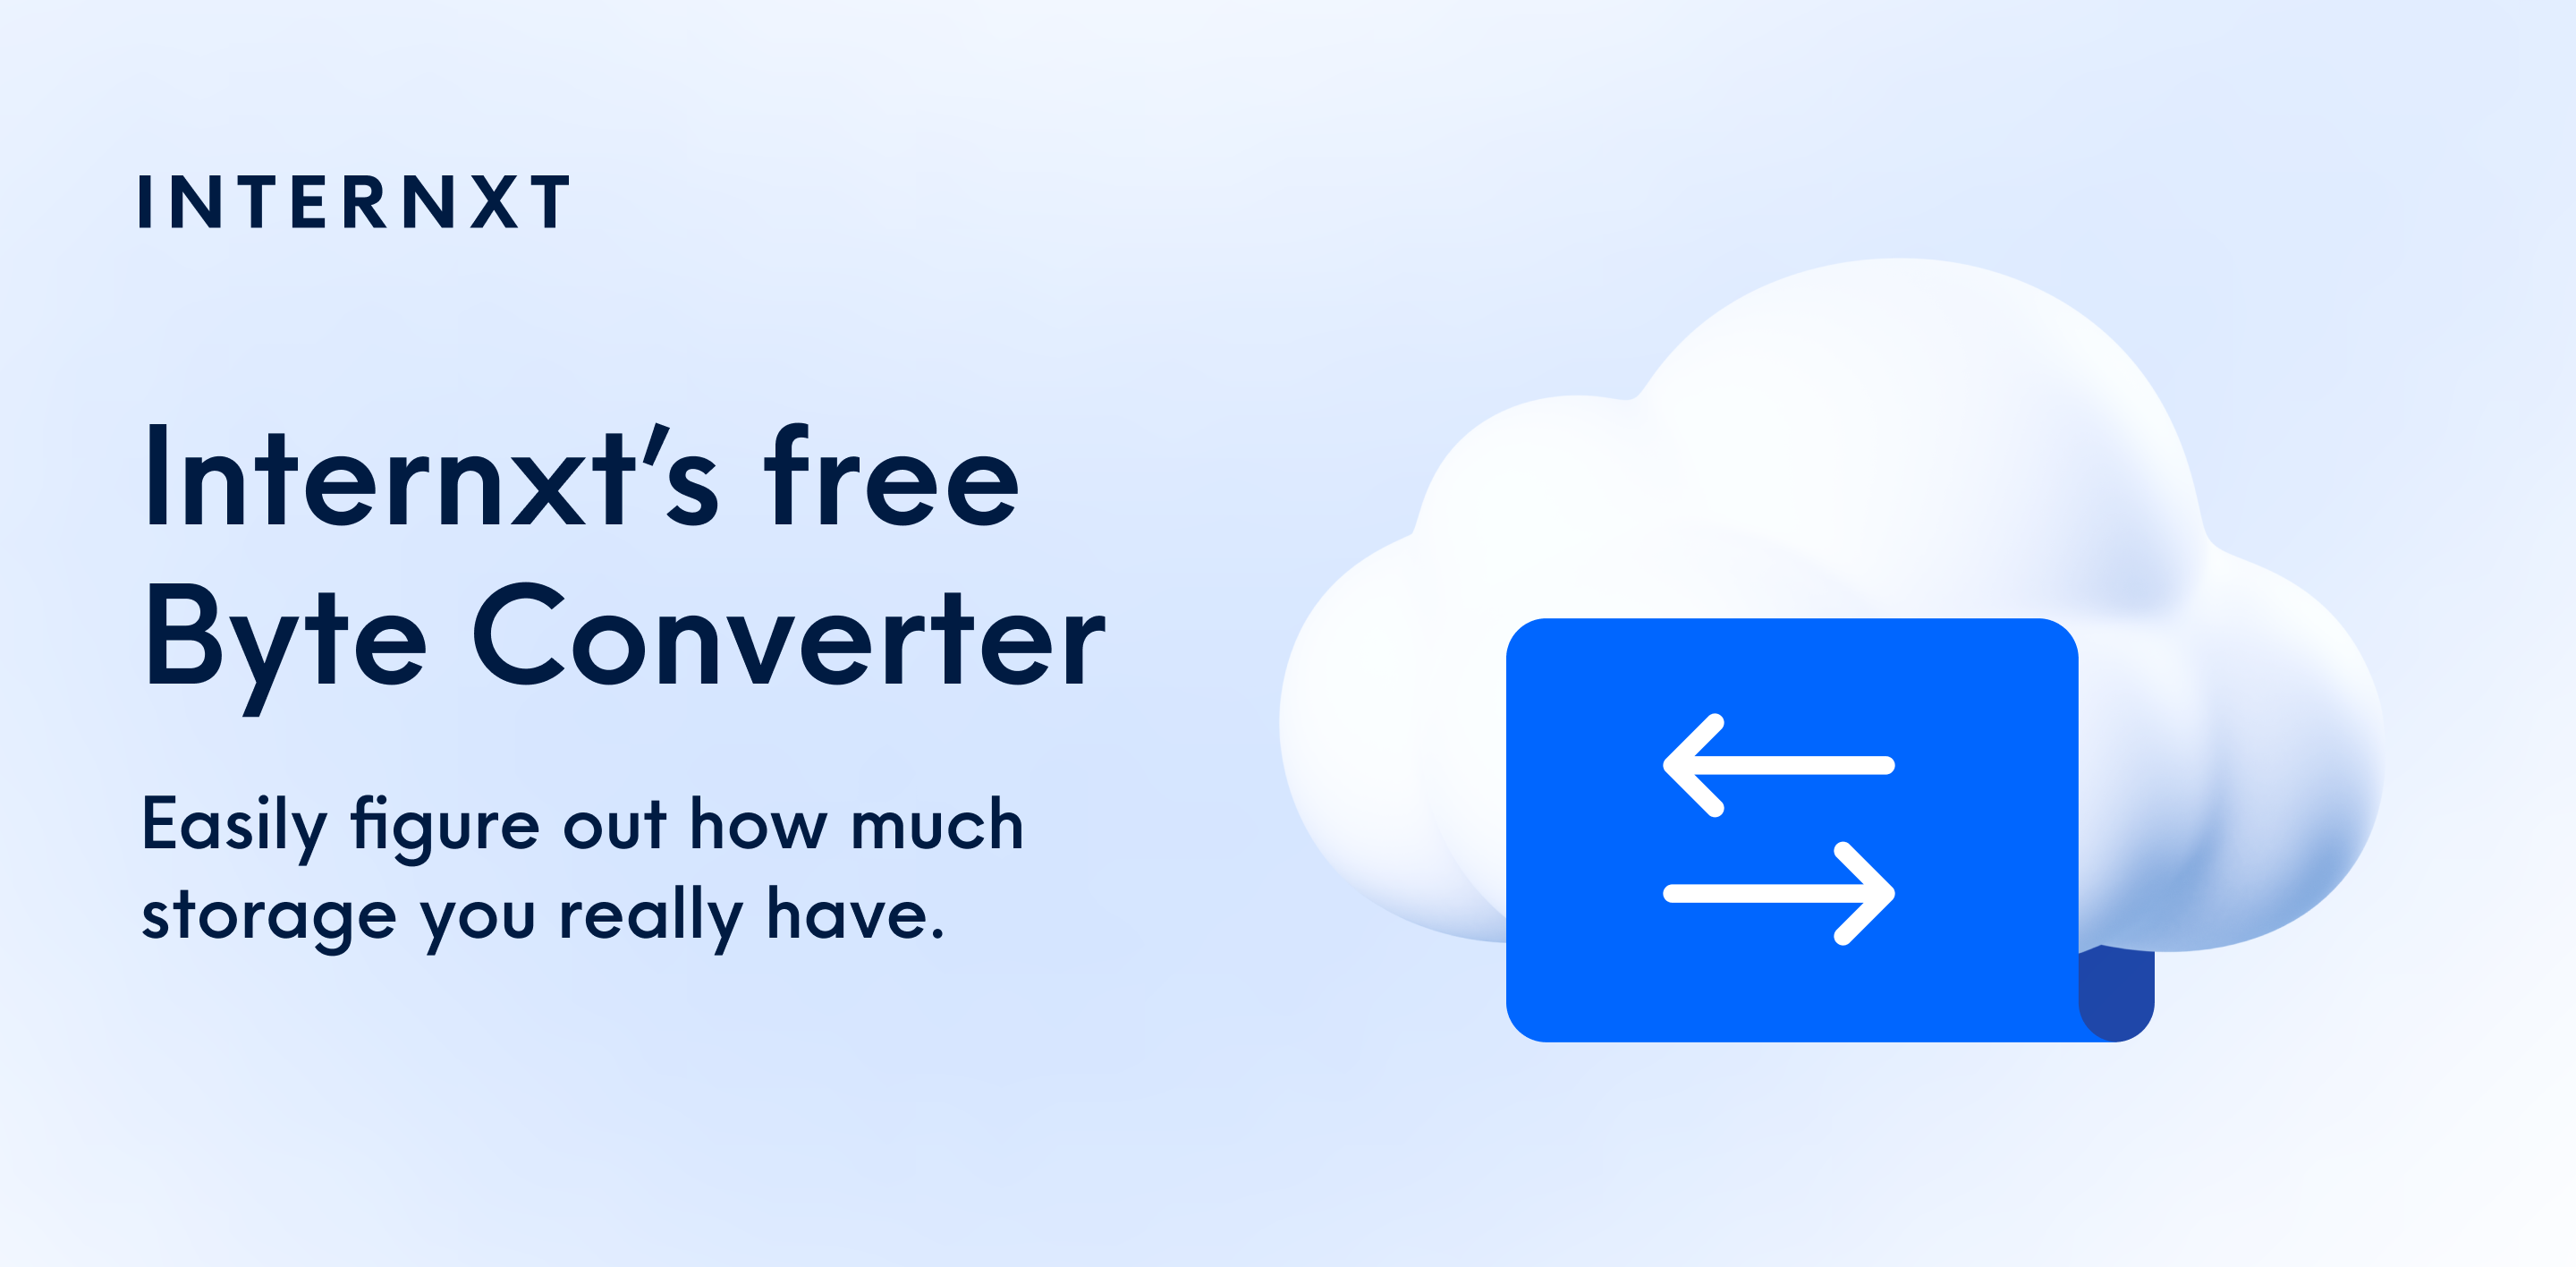 Internxt Byte Converter helps you convert GB to TB & more.